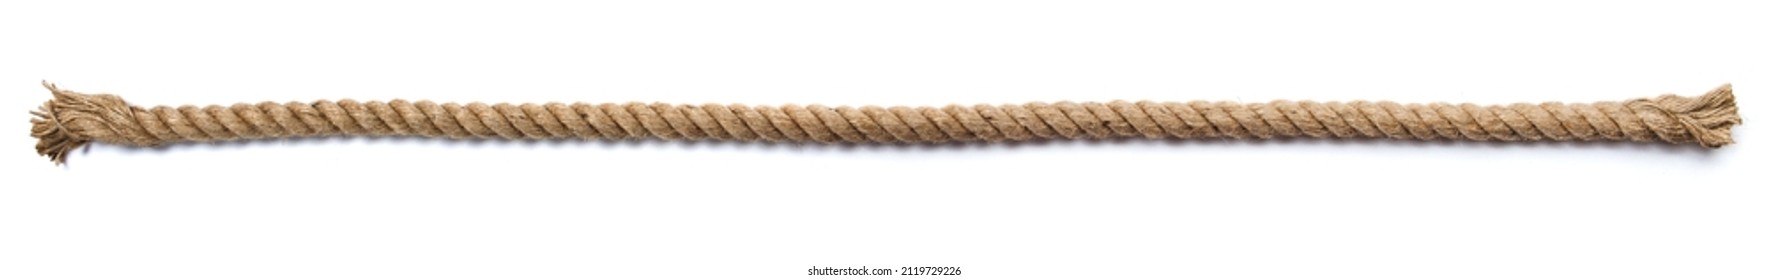 Rope isolated on a white background - Shutterstock ID 2119729226